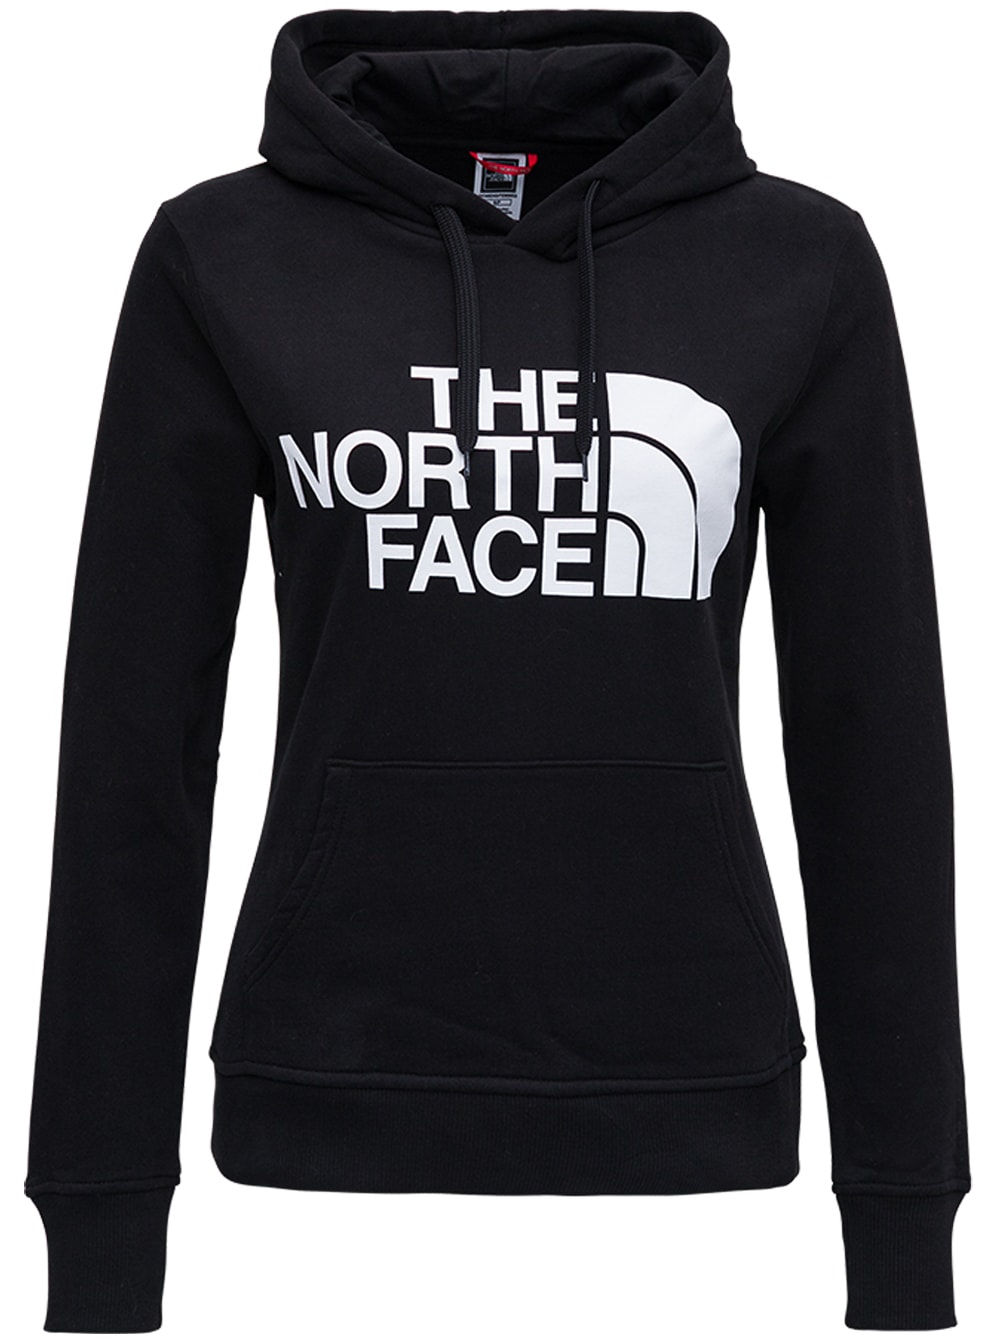 The North Face Black Jersey Hoodie With Print